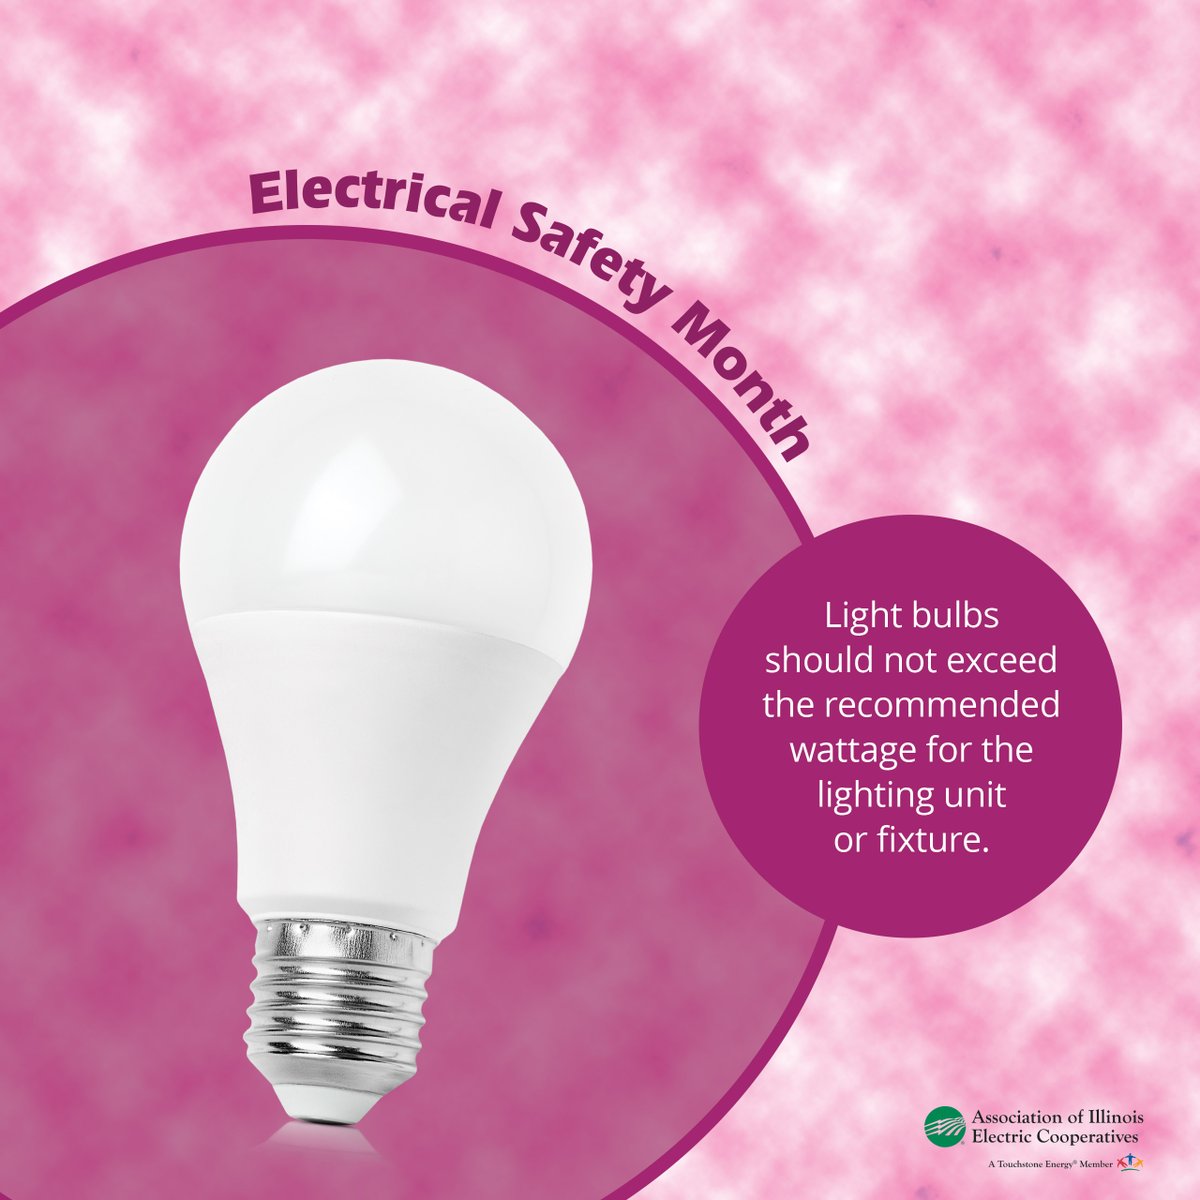 Here’s a bright idea for home safety: make sure all light bulbs are properly rated for the unit or fixture. 📷📷 #ElectricalSafetyMonth